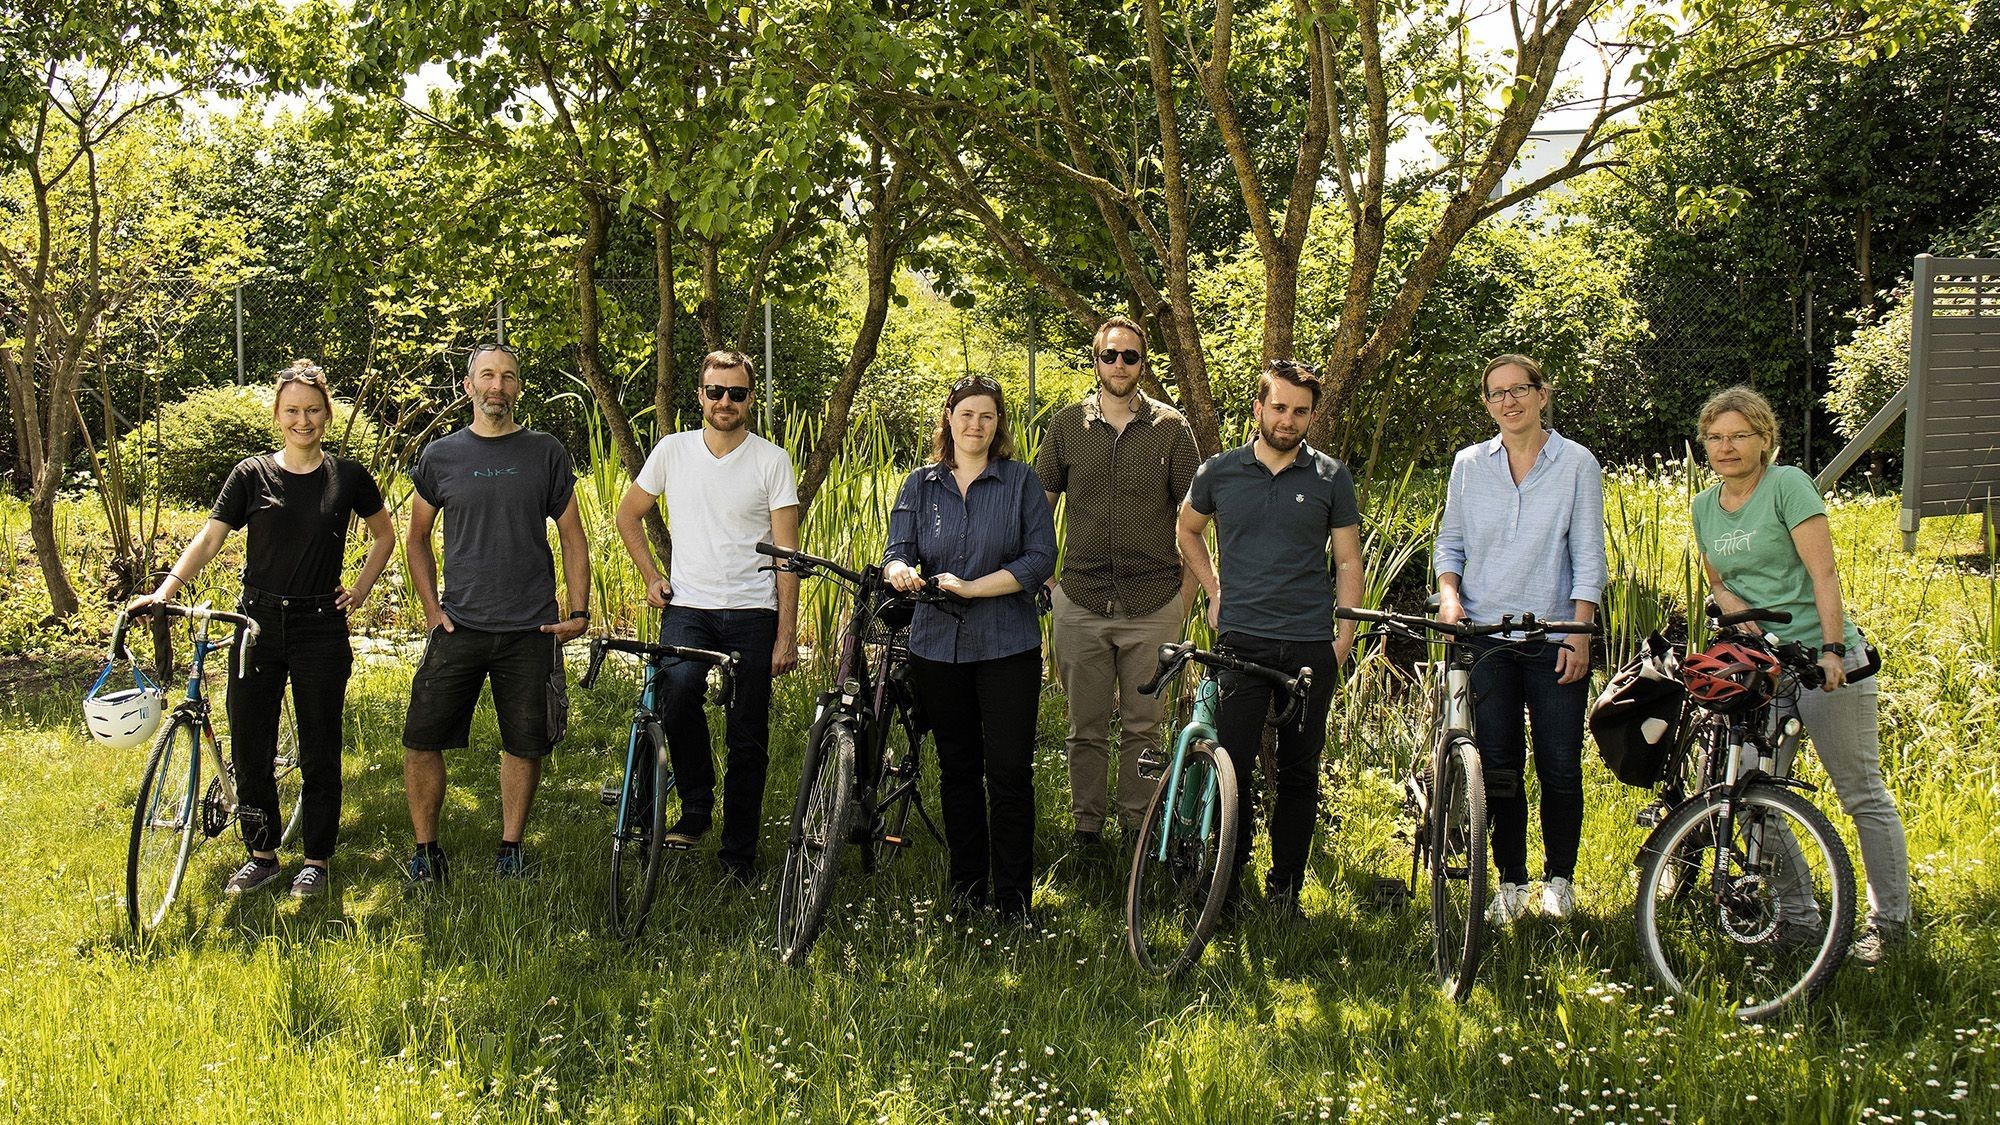 Group picture with bicycles